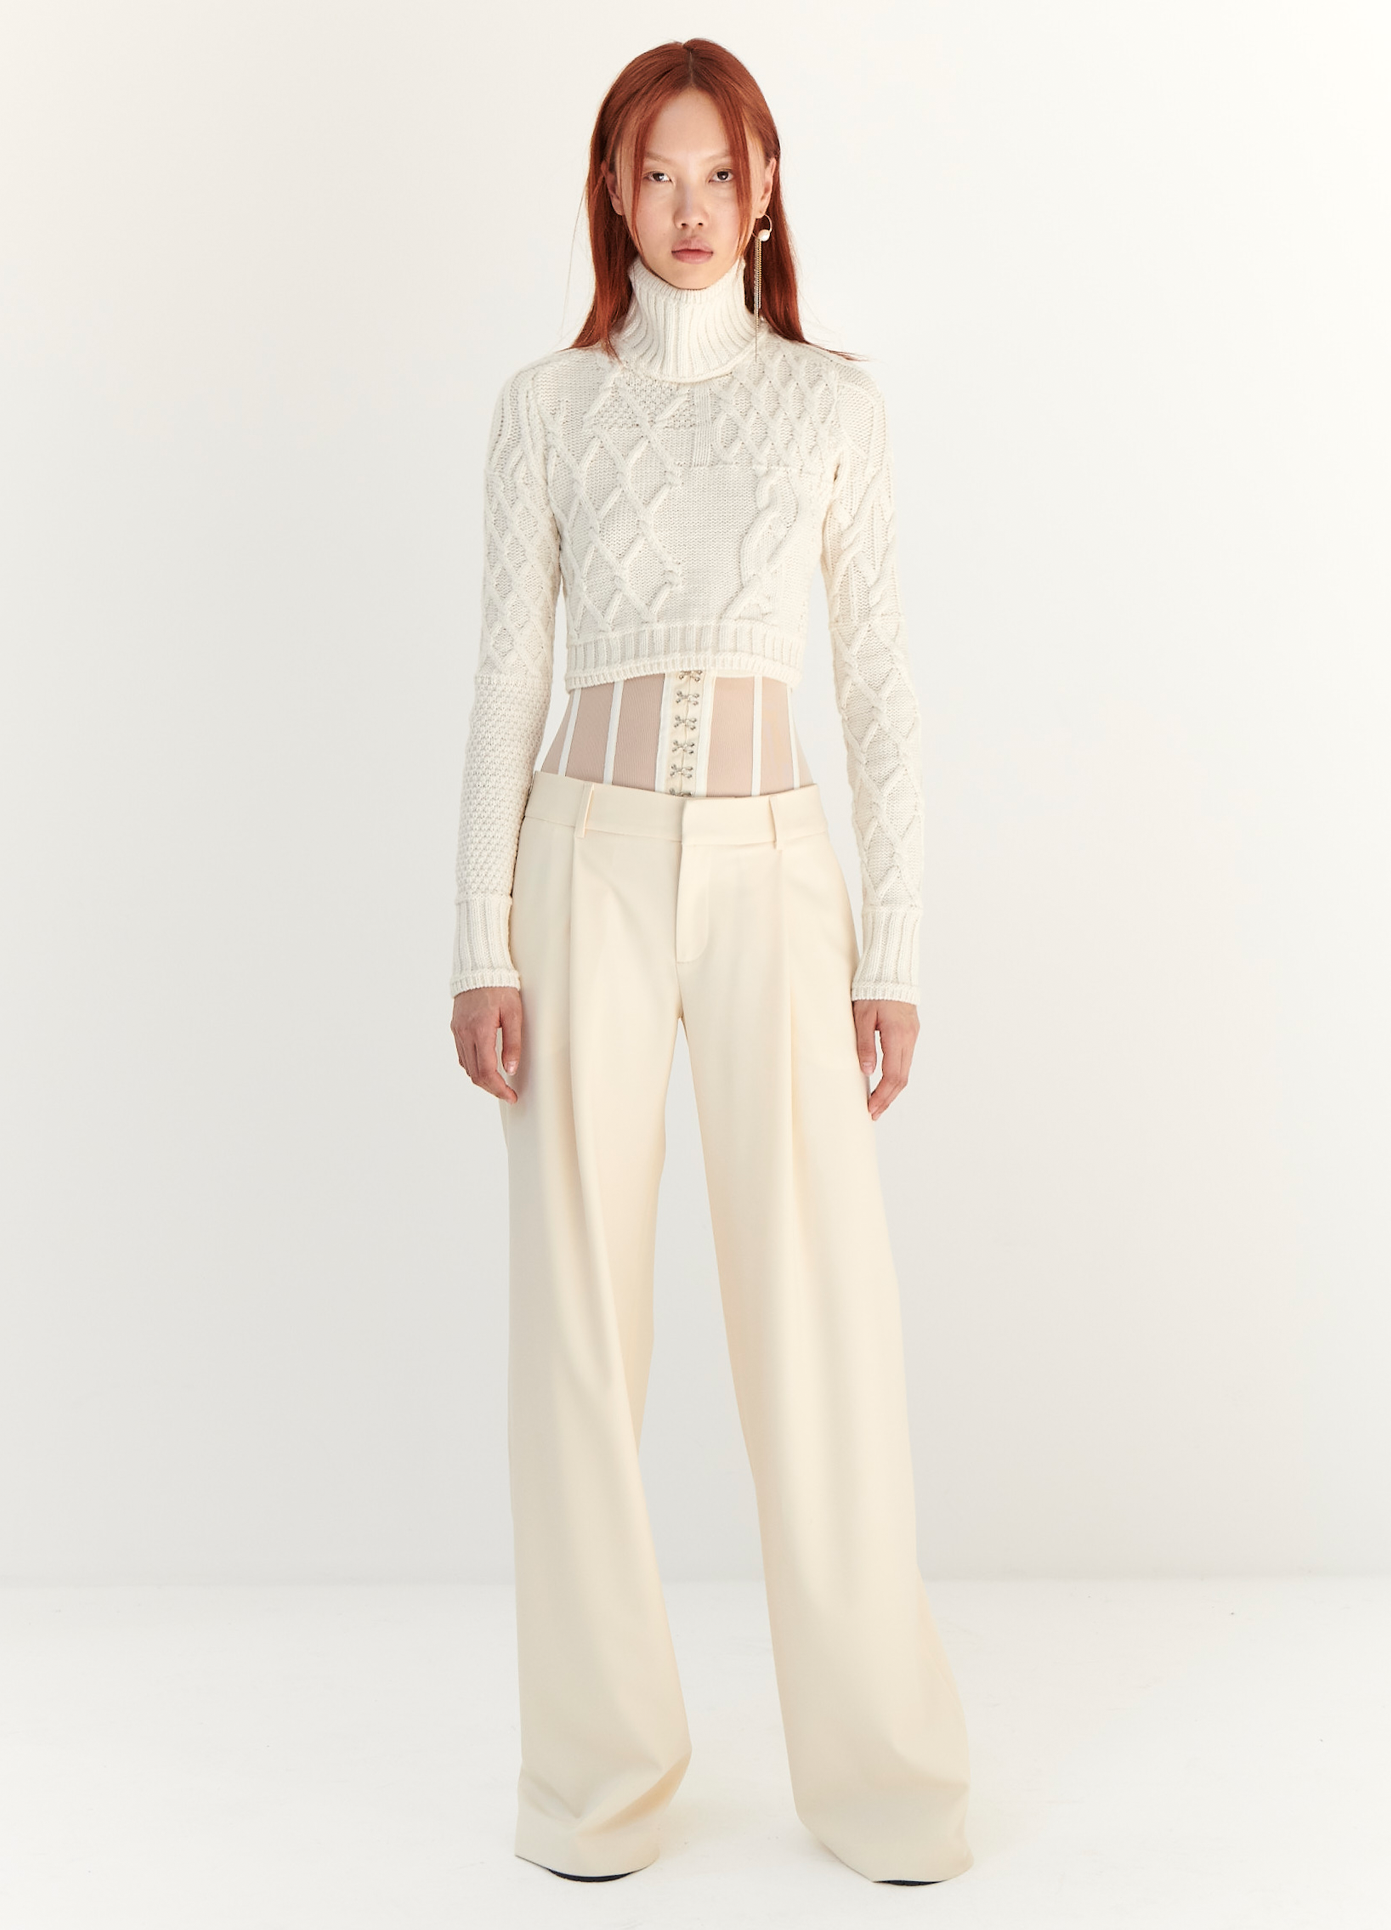 MONSE Mesh Bustier Trousers in Ivory on model full front view